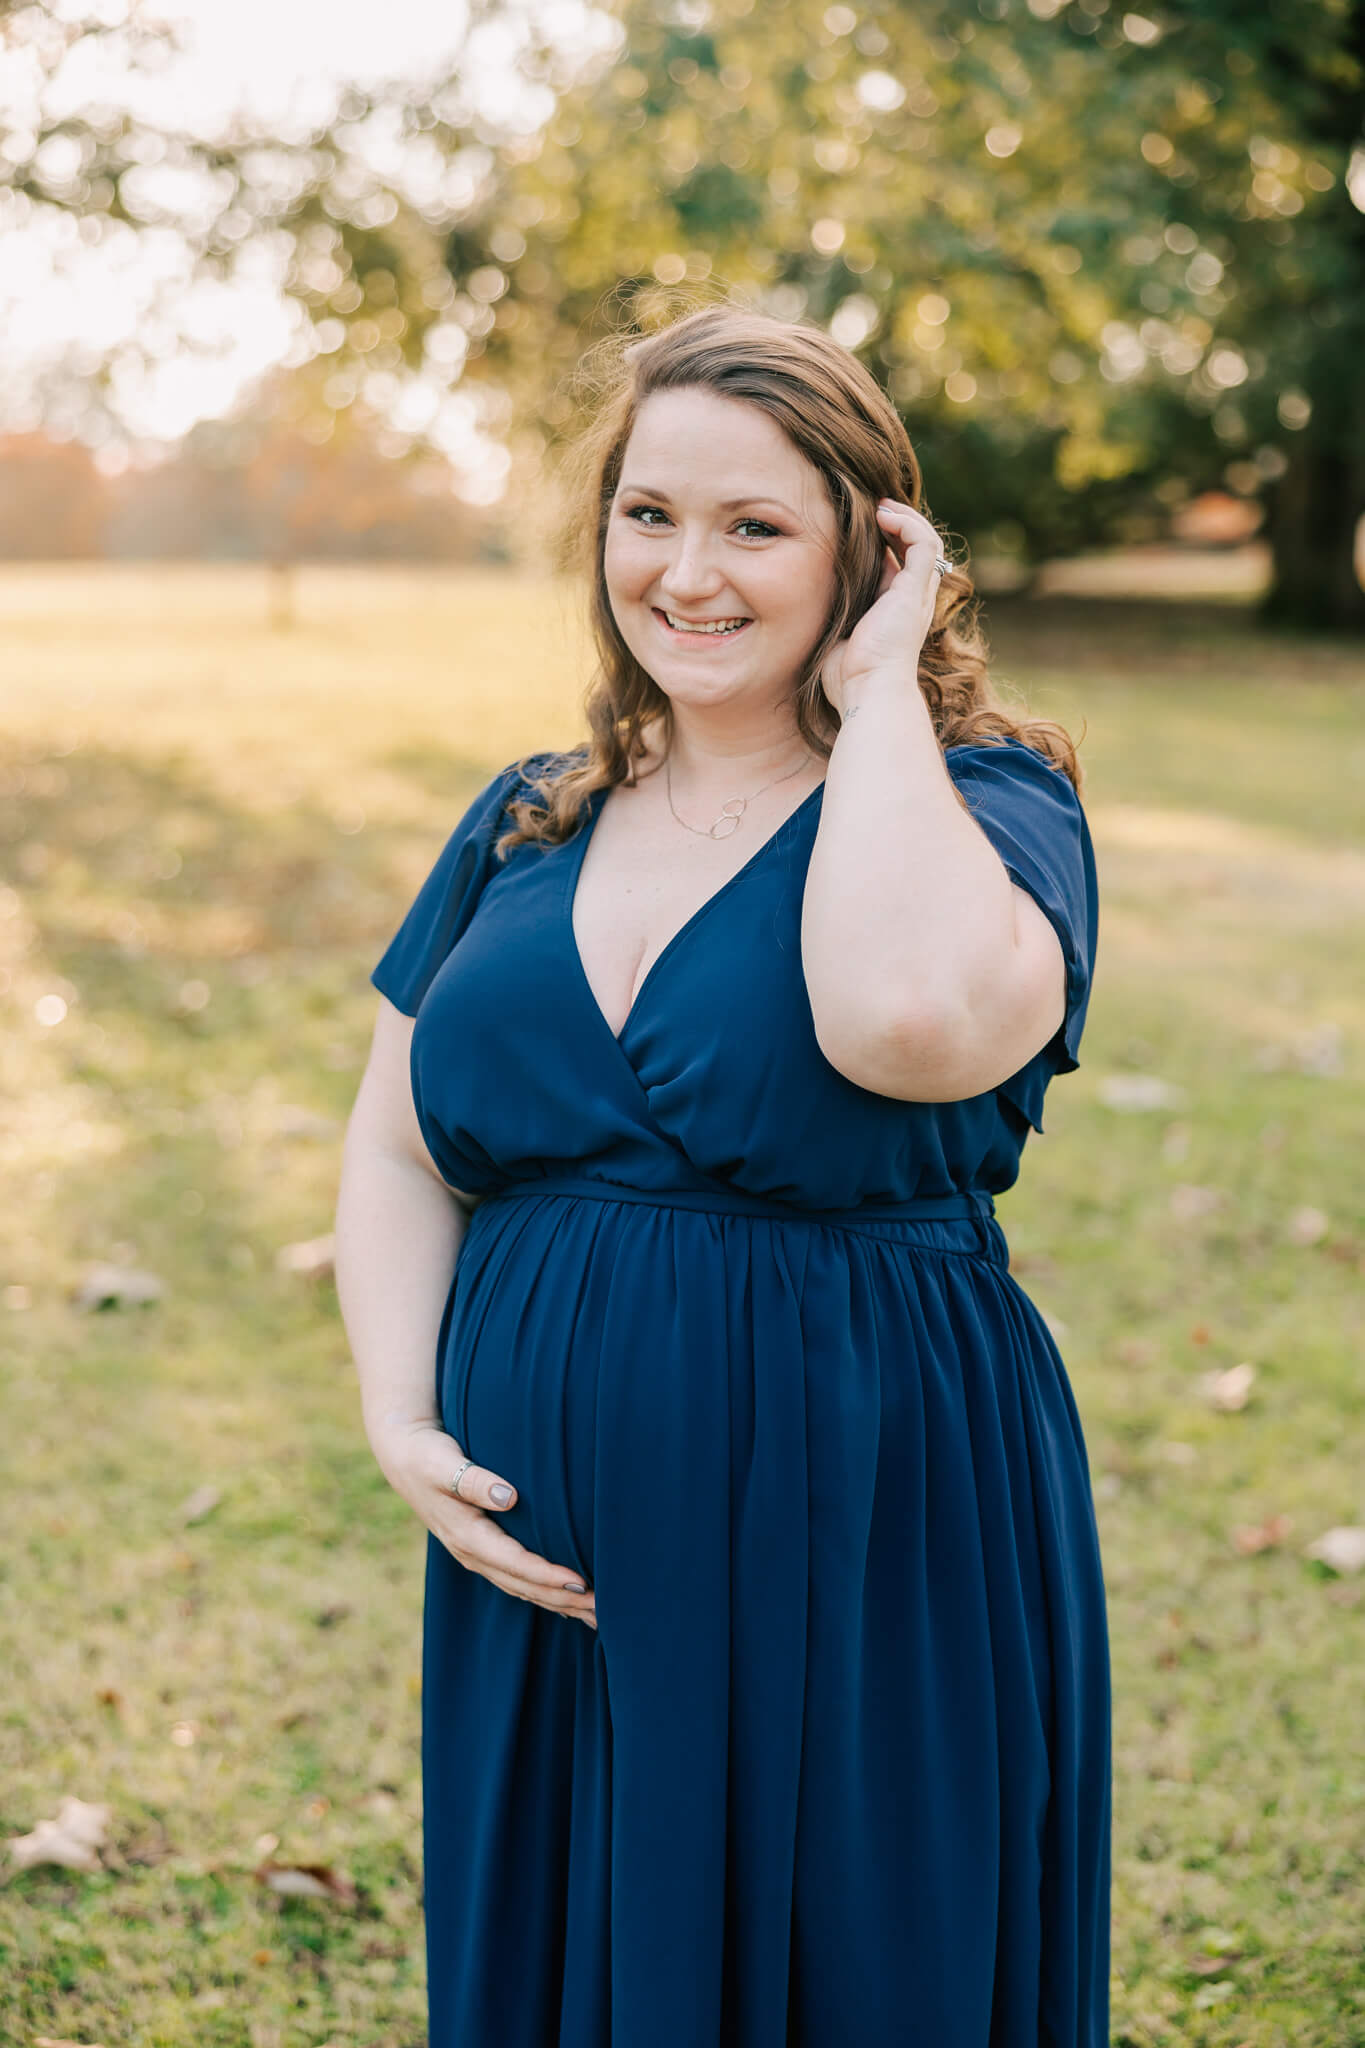 Expecting mom sharing a laugh during her maternity session in columbia, sc. Mom is wearing a navy blue dress provided by molly berry photography.